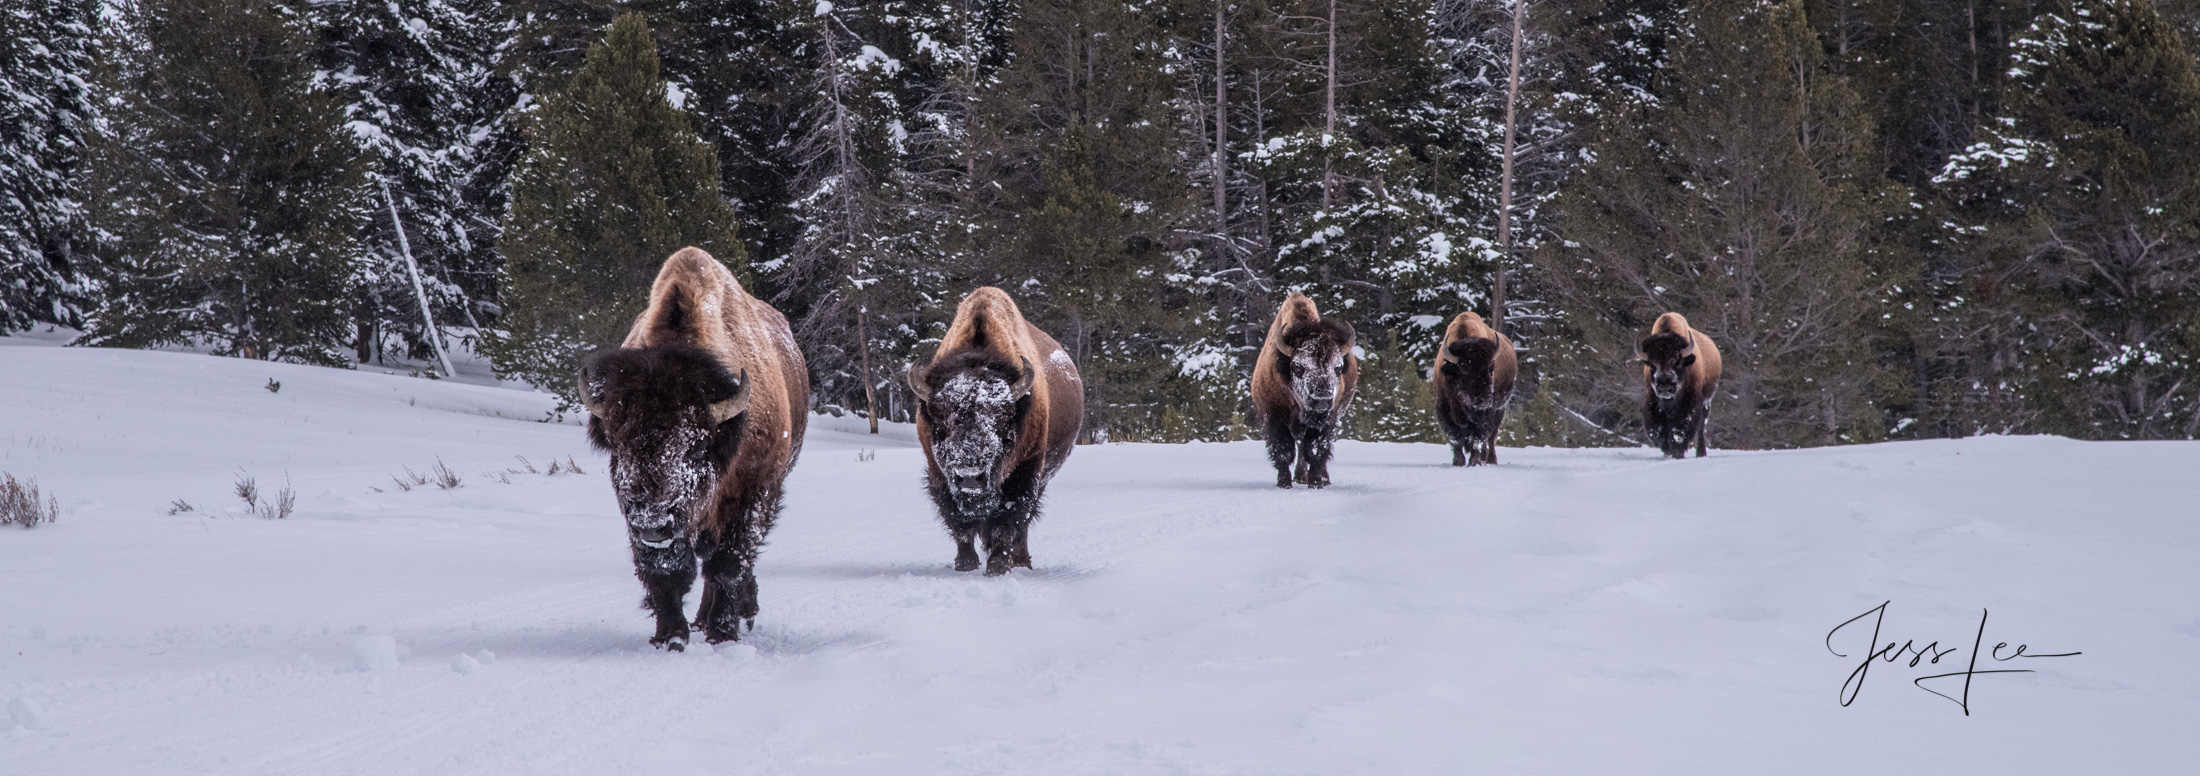 Yellowstone Bull Bison lined up walking in winter snow with snow on there face.